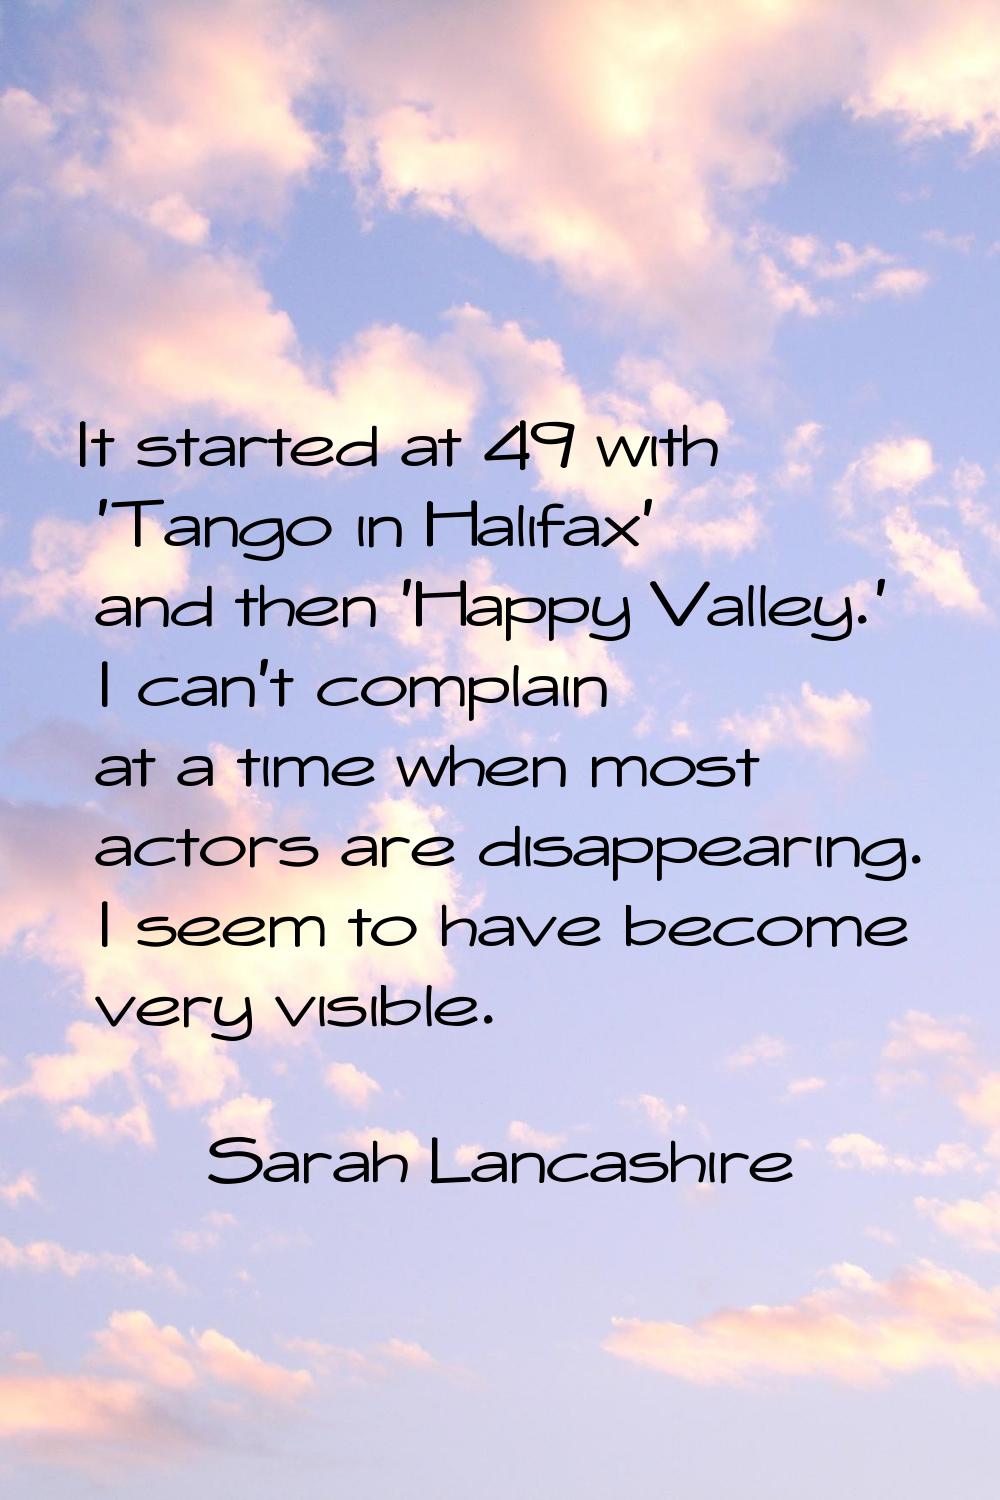 It started at 49 with 'Tango in Halifax' and then 'Happy Valley.' I can't complain at a time when m